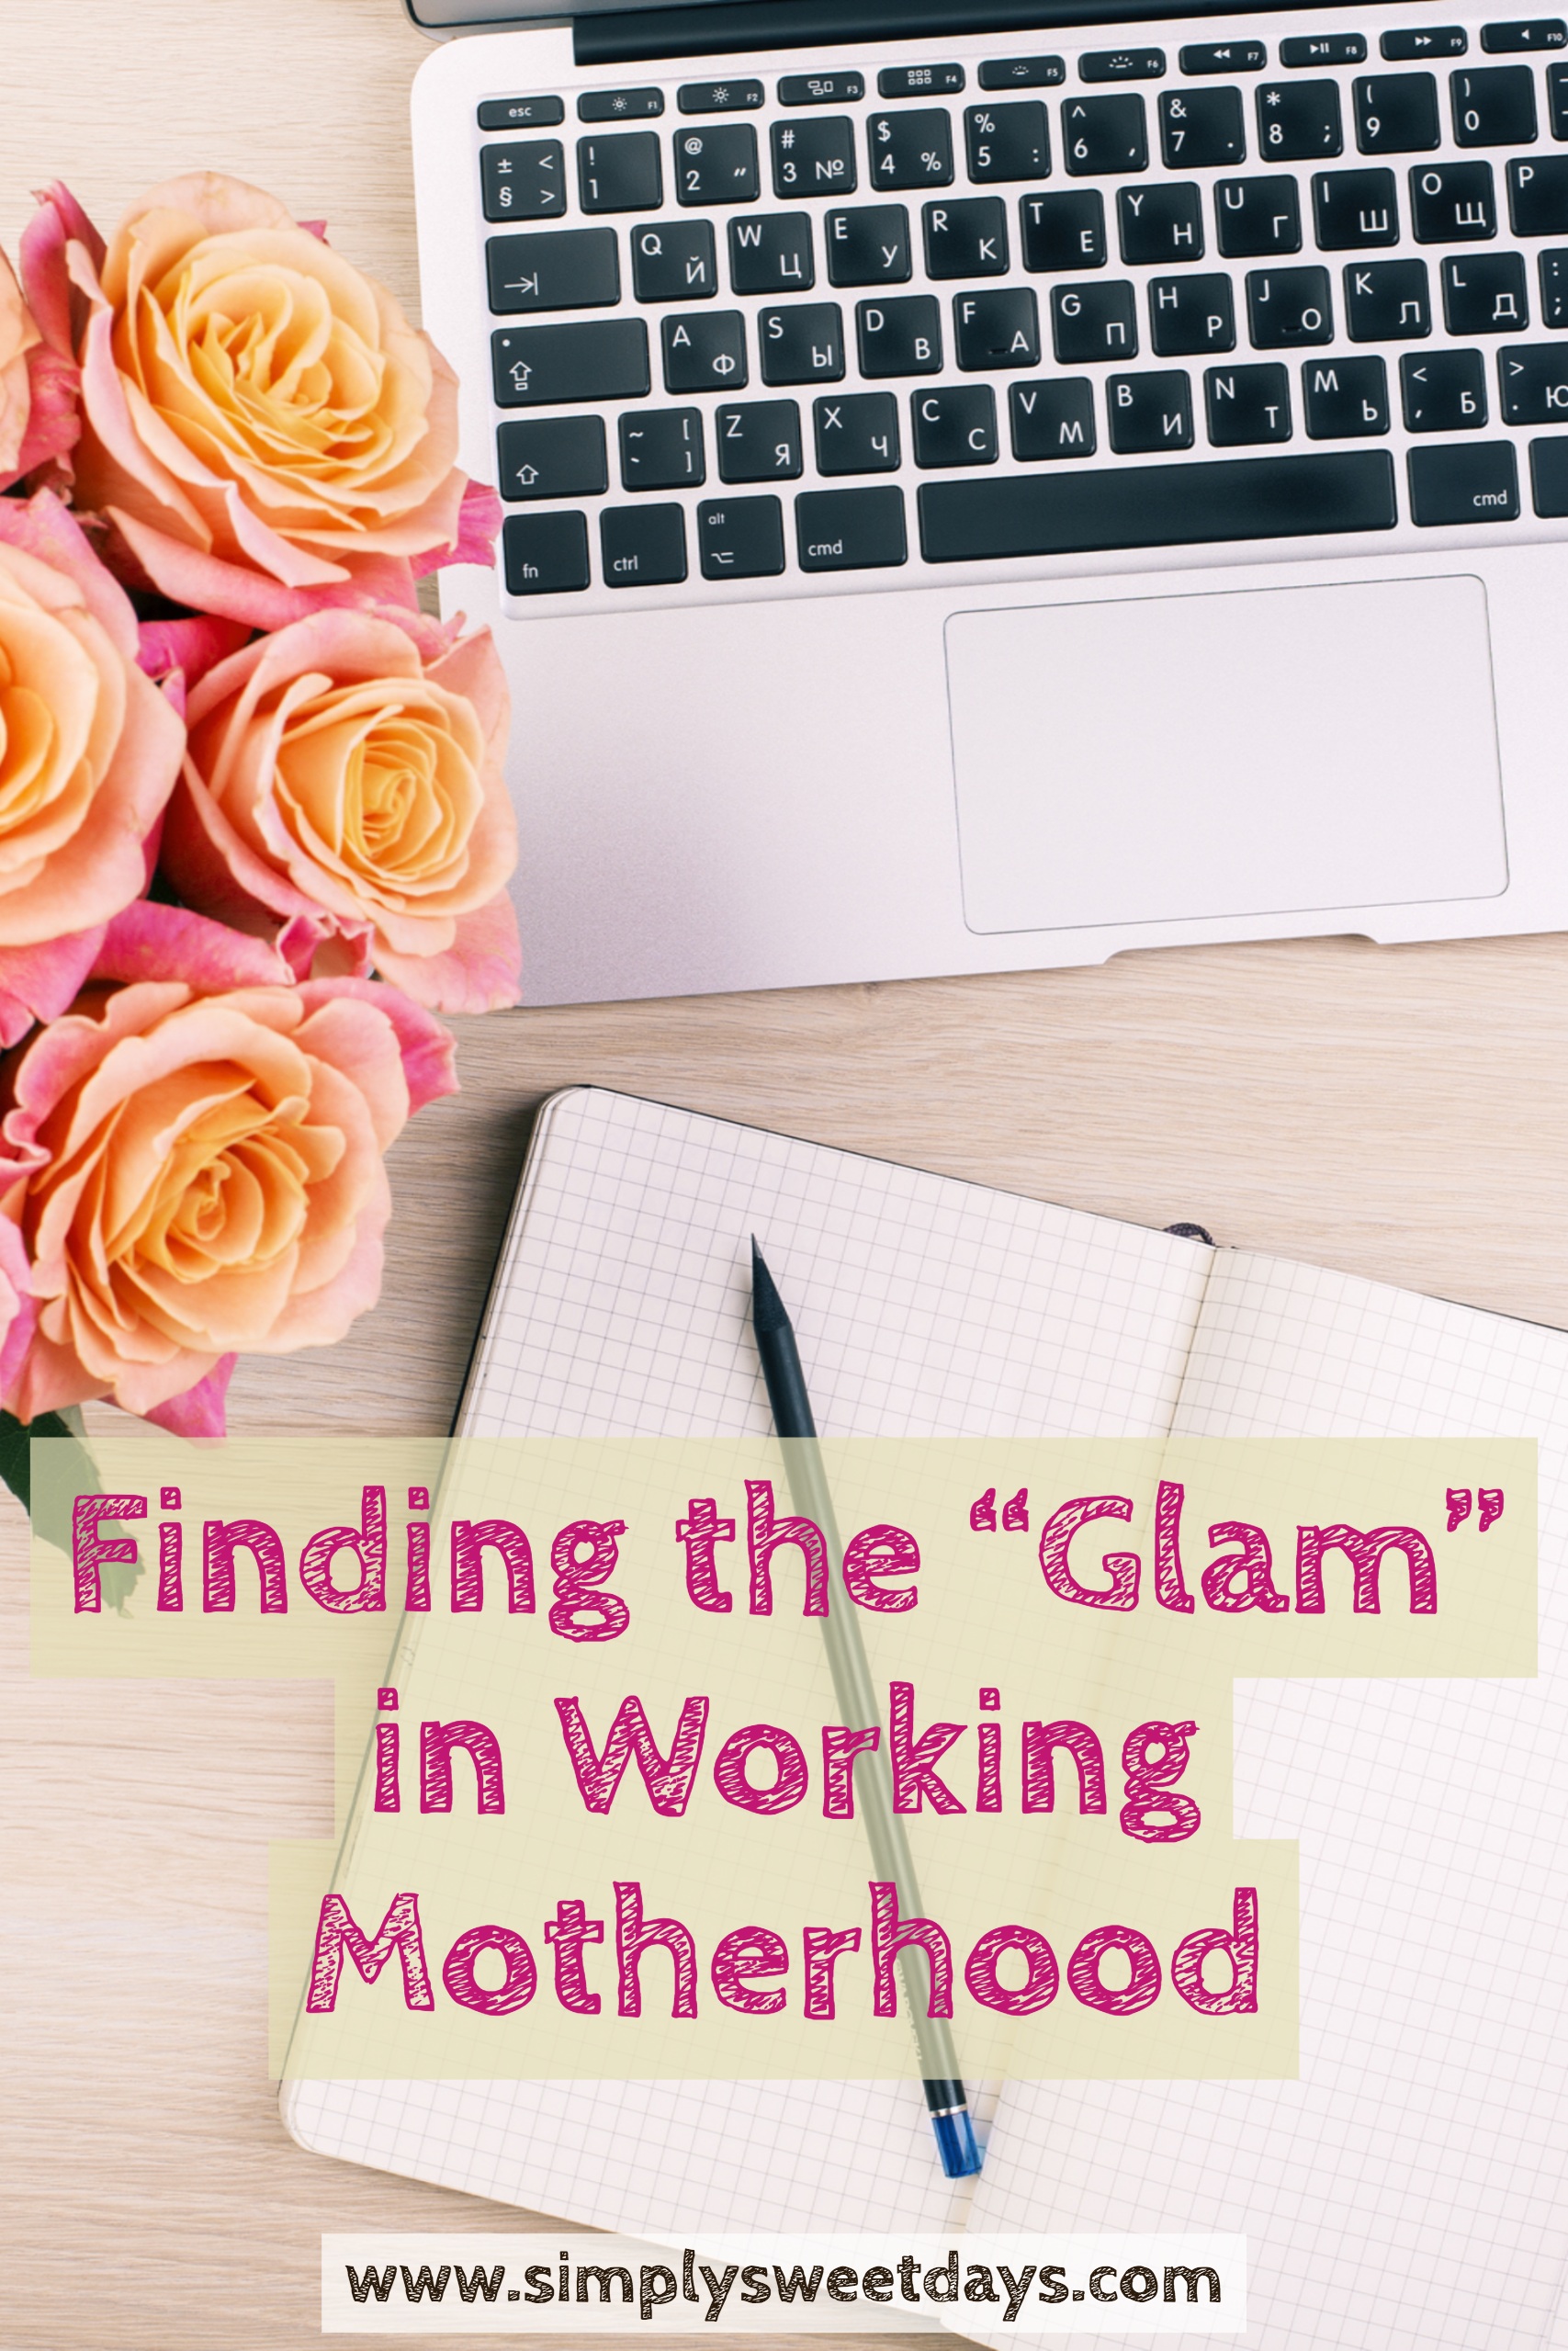 Kick the working mom guilt goodbye. These are just a few ways I celebrate my role as a working mother, even on days when I'd rather be at home with my kids. 